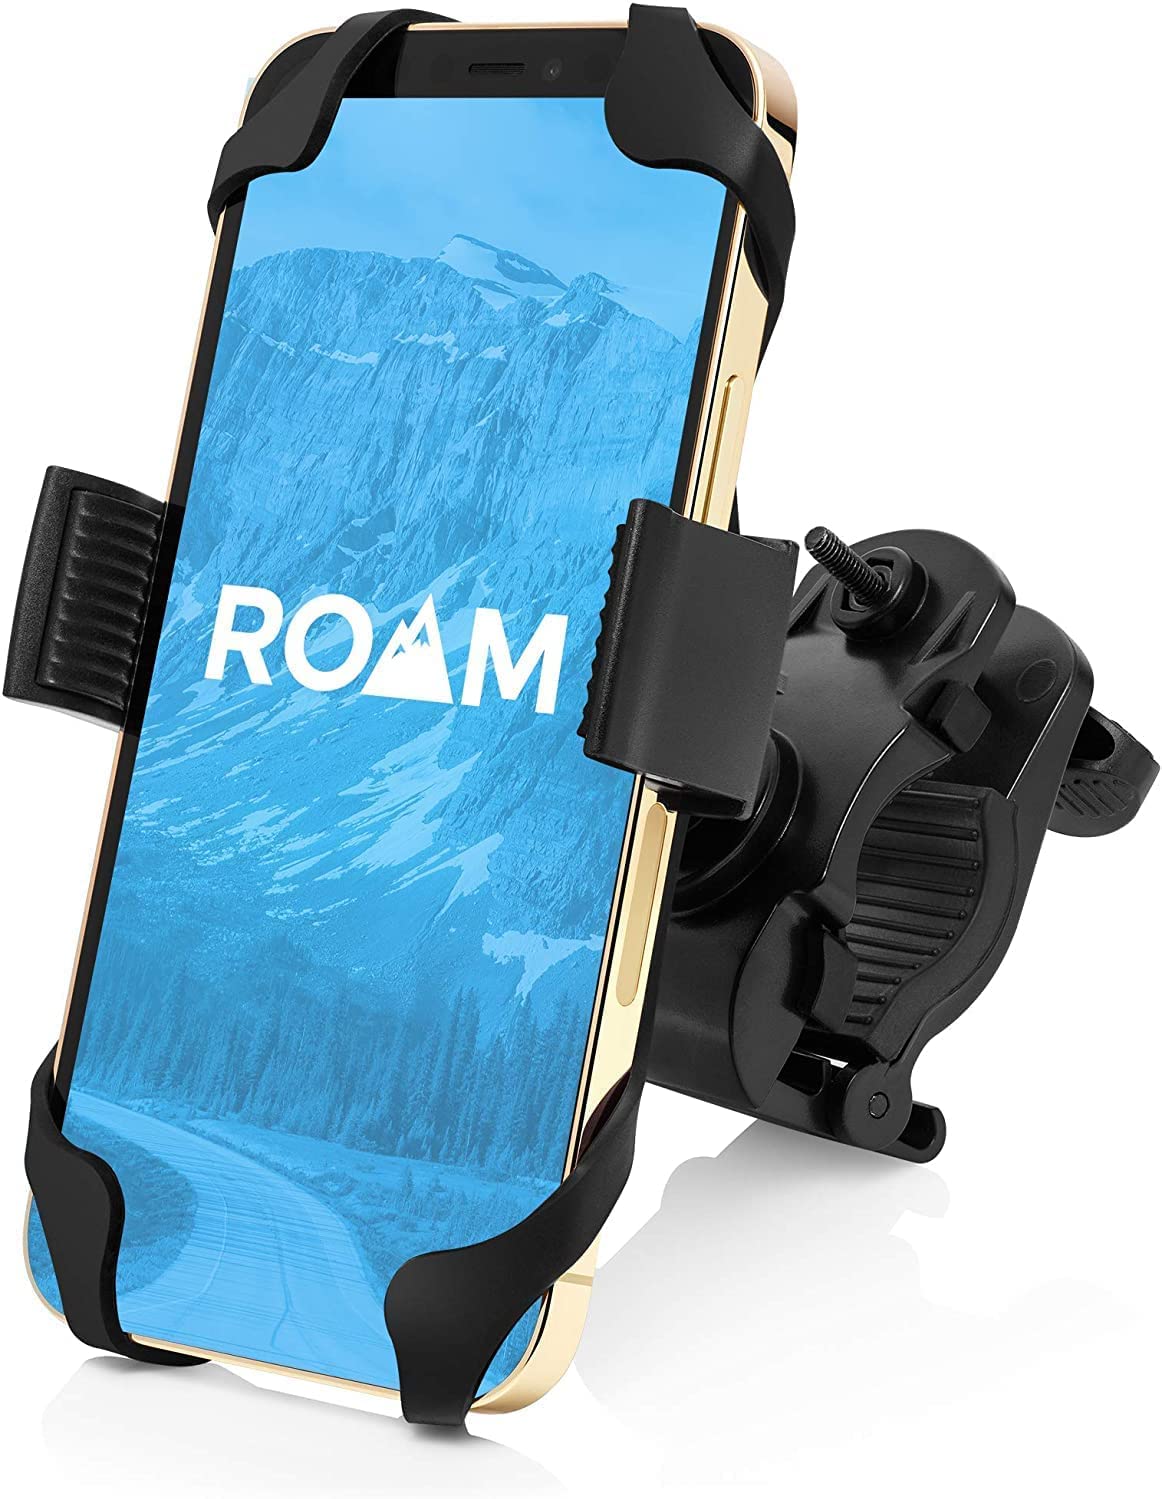 SmartTechShopping Phone Holder Roam Bike Phone Mount Adjustable Handlebar of Motorcycle Phone Mount for Electric, Mountain, Scooter, and Dirt Bikes